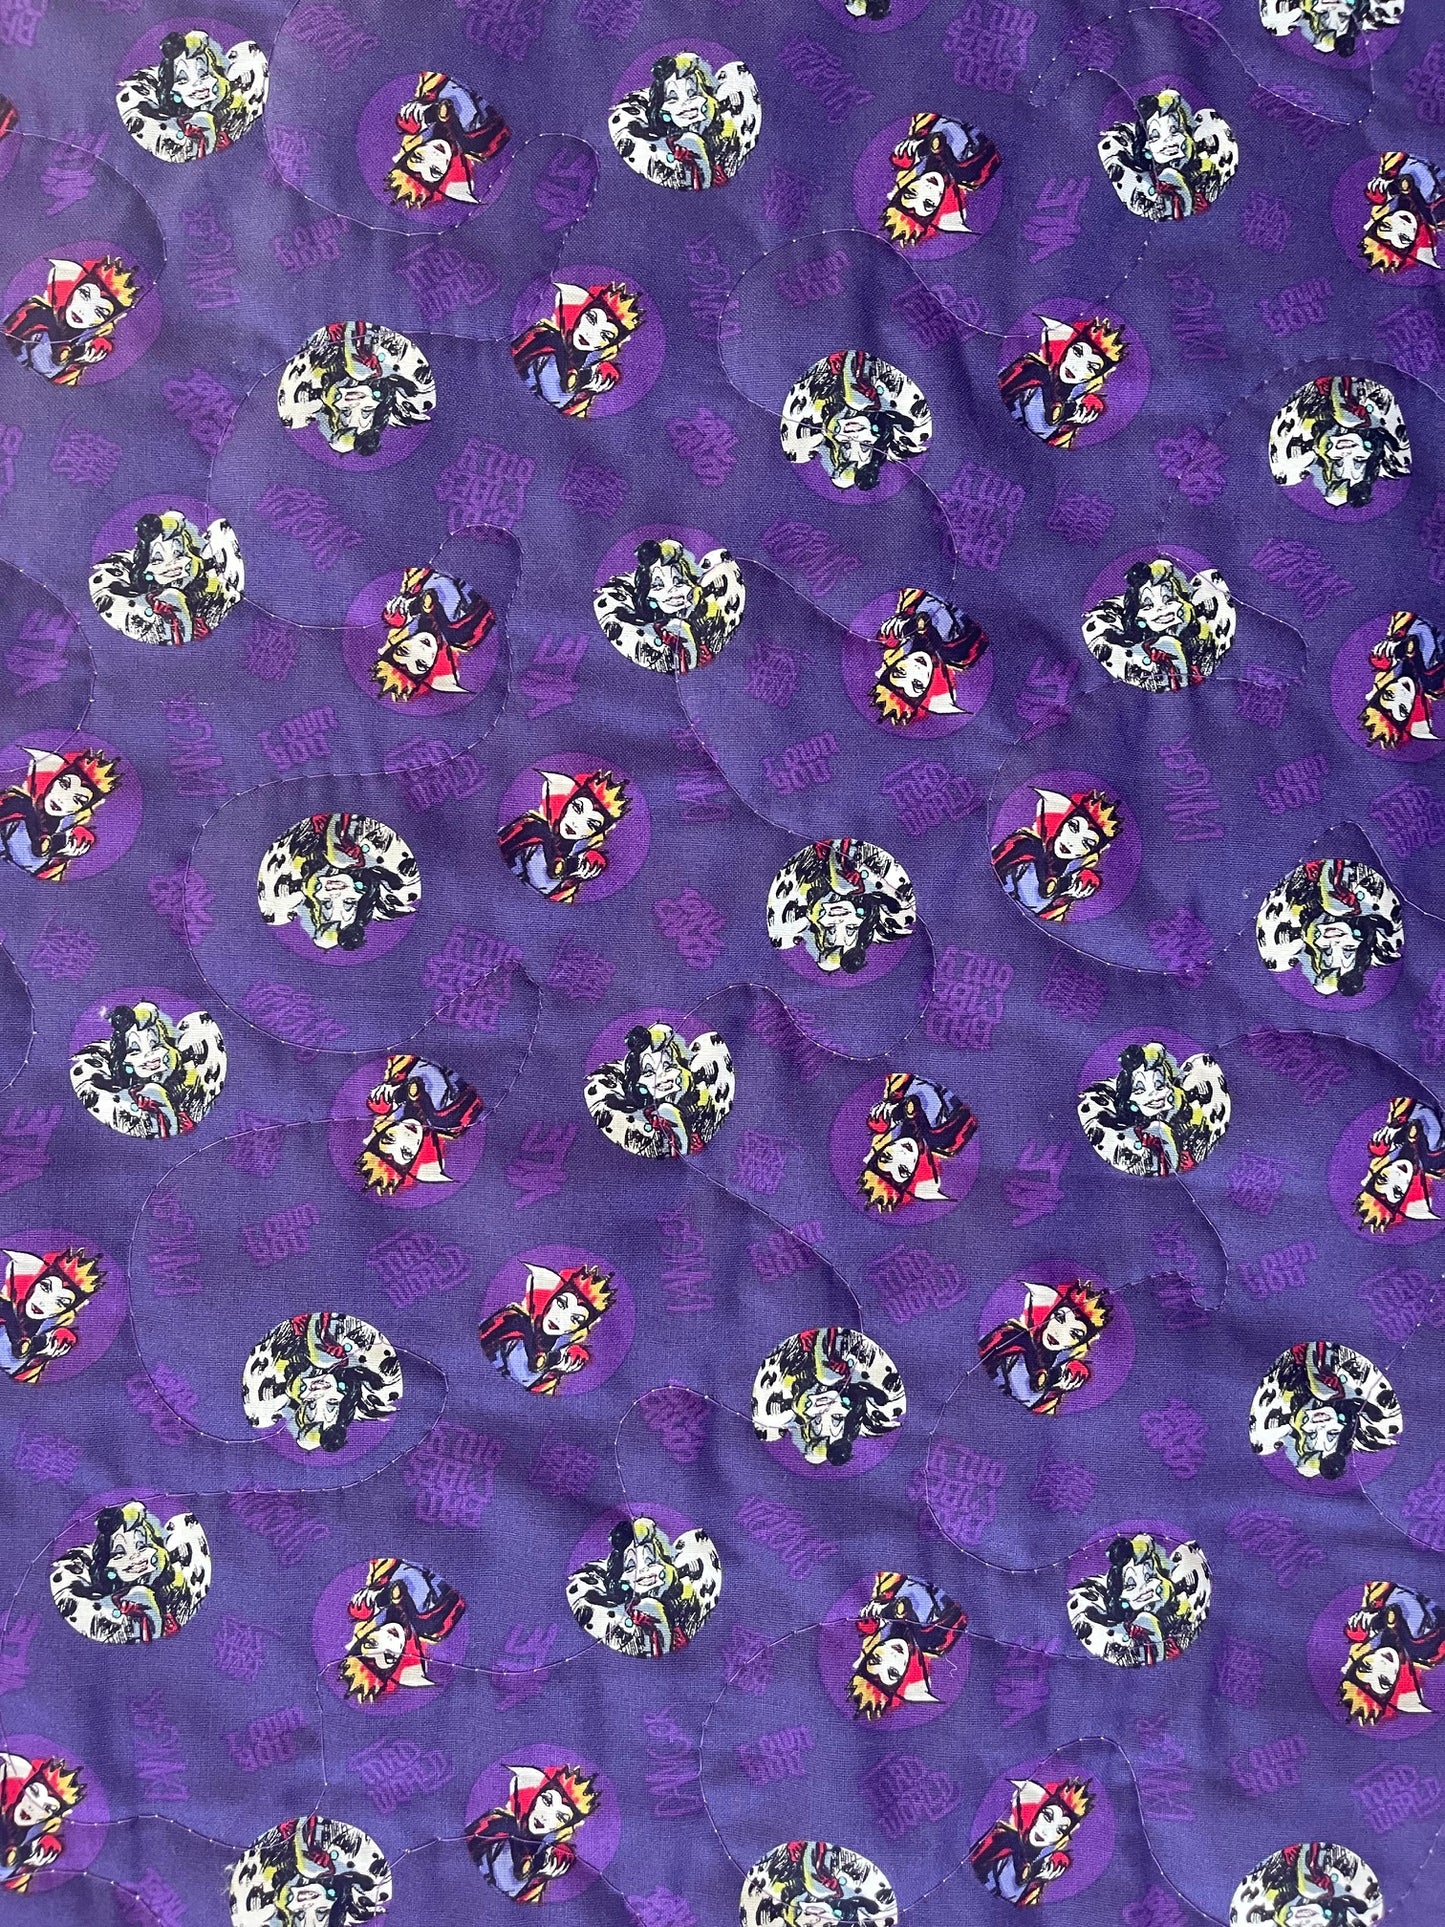 DISNEY INCREDIBLY FABULOUS VILLAINS, URSULA, EVIL WITCH, CRUELLA DE VIL, MALEFICENT INSPIRED QUILTED BLANKET